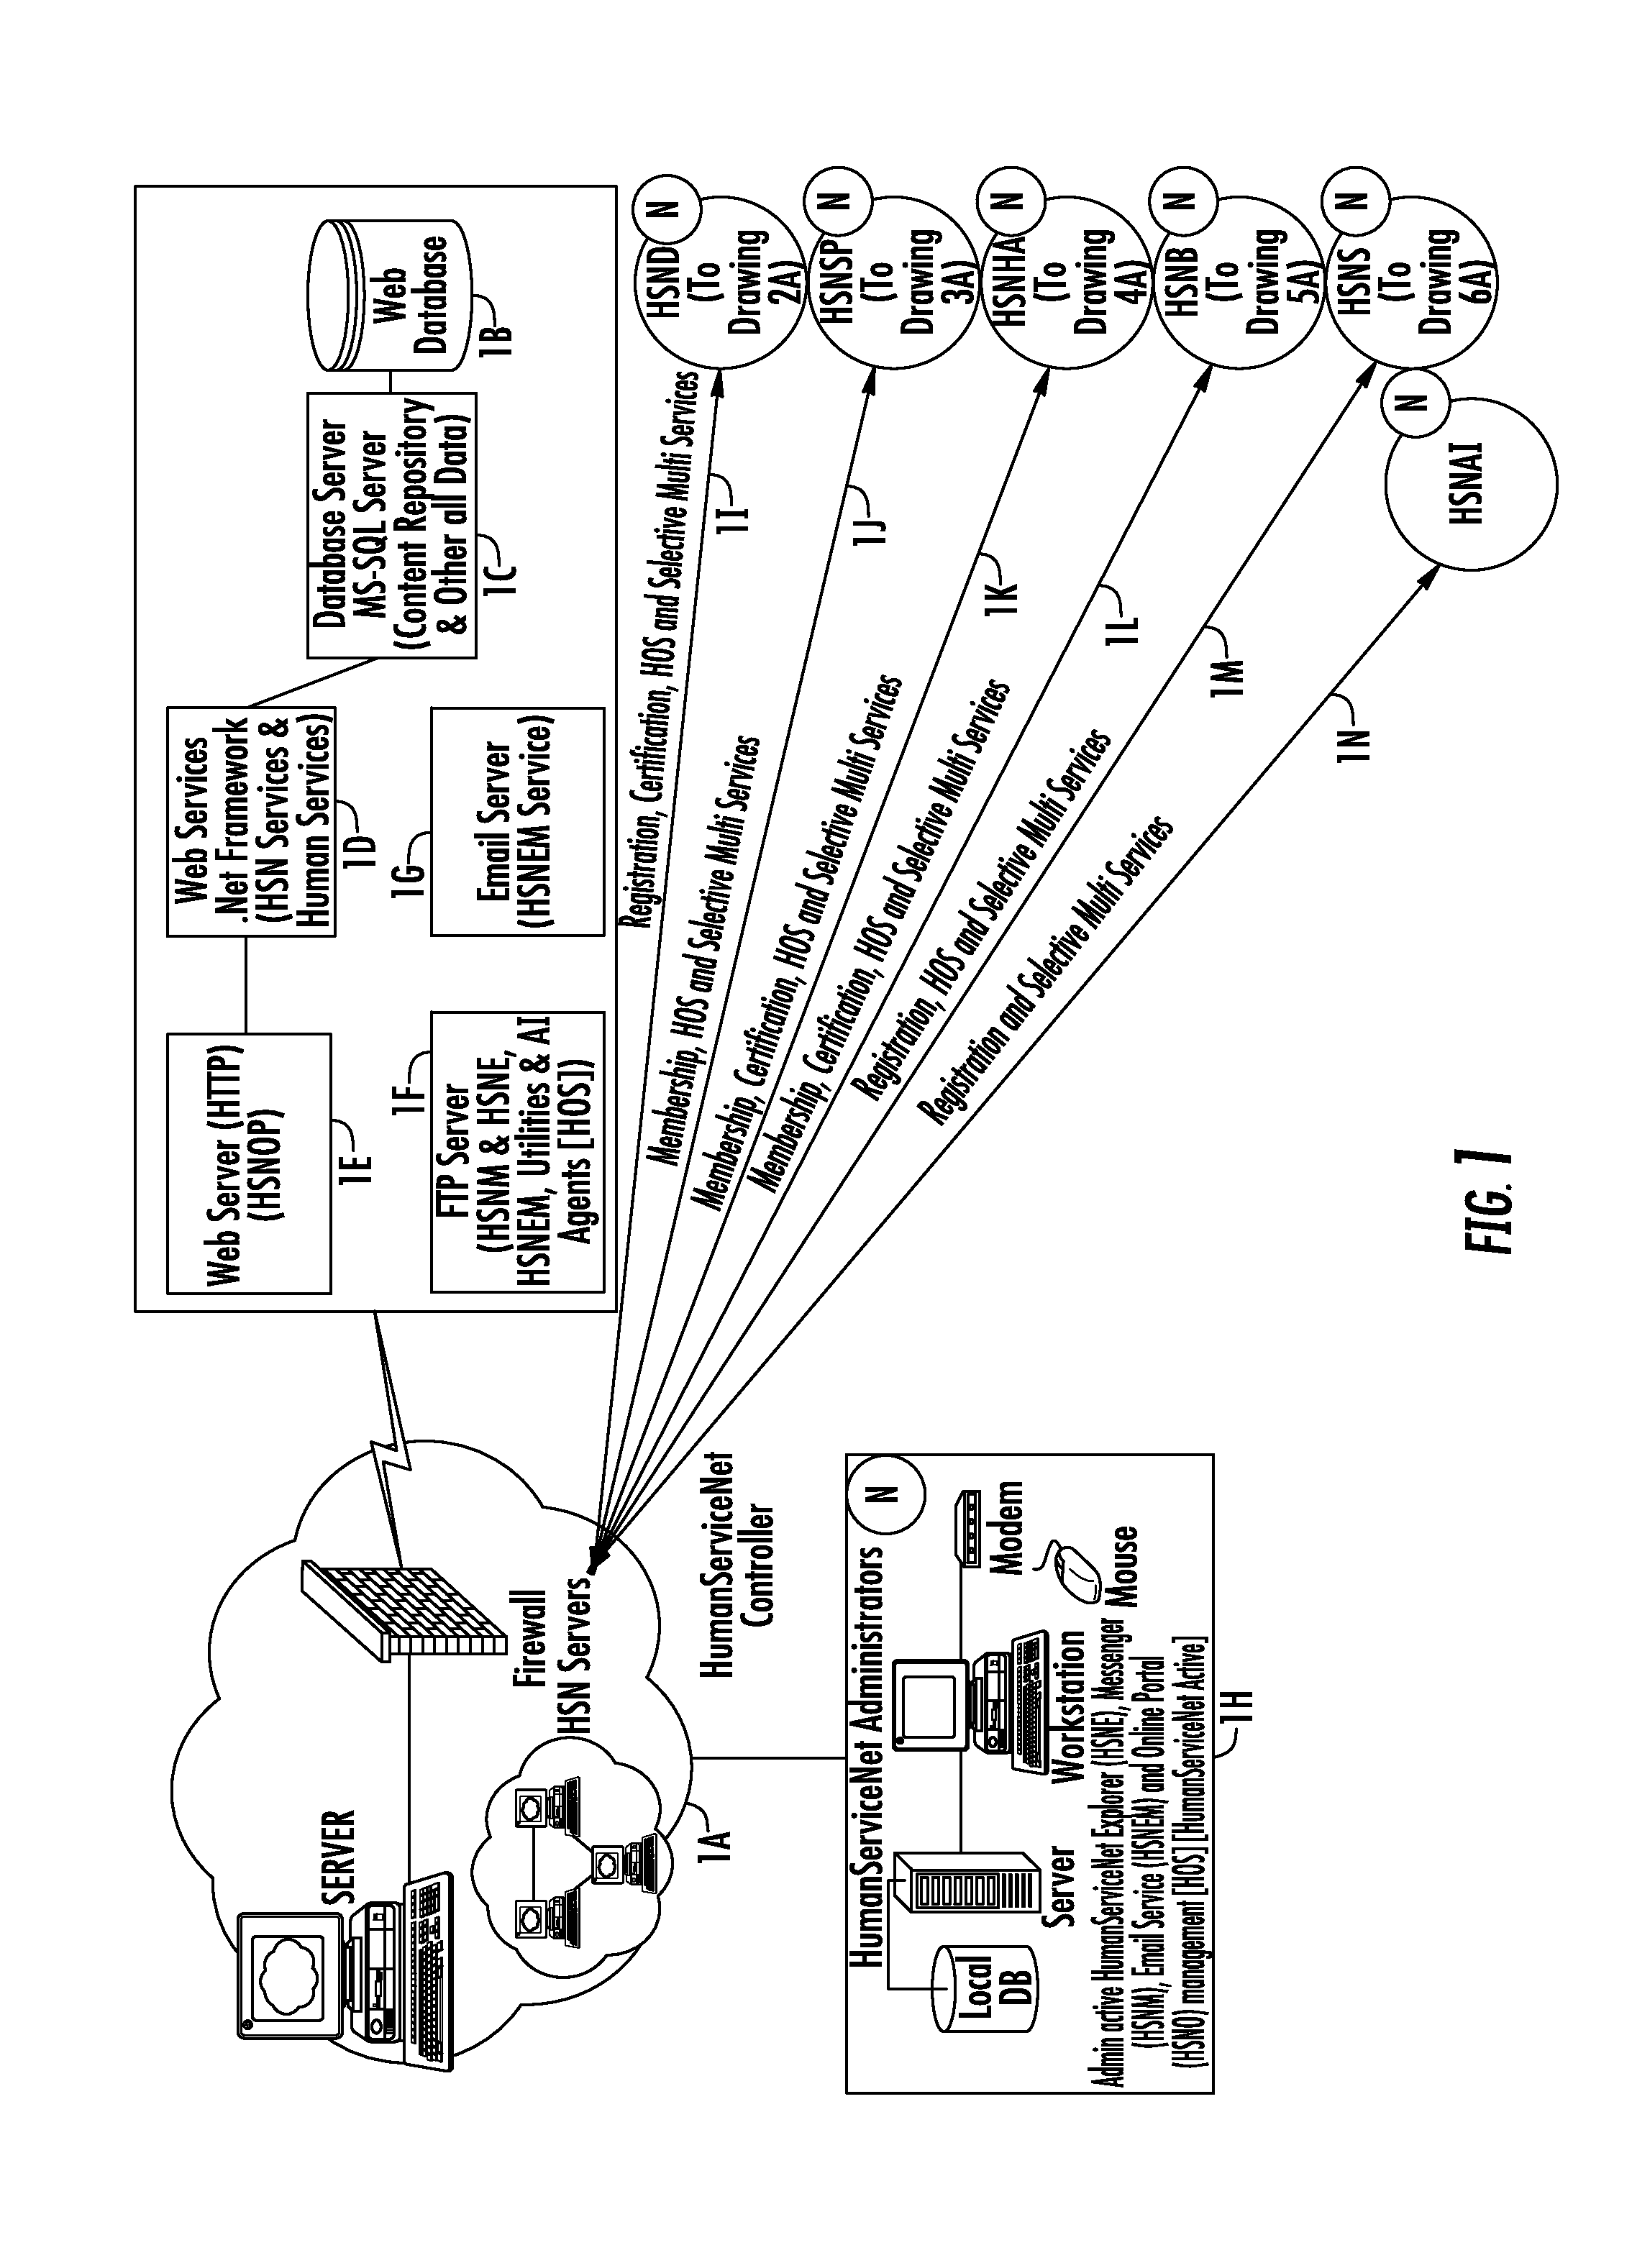 System and method of searching, sharing, and communication in a plurality of networks